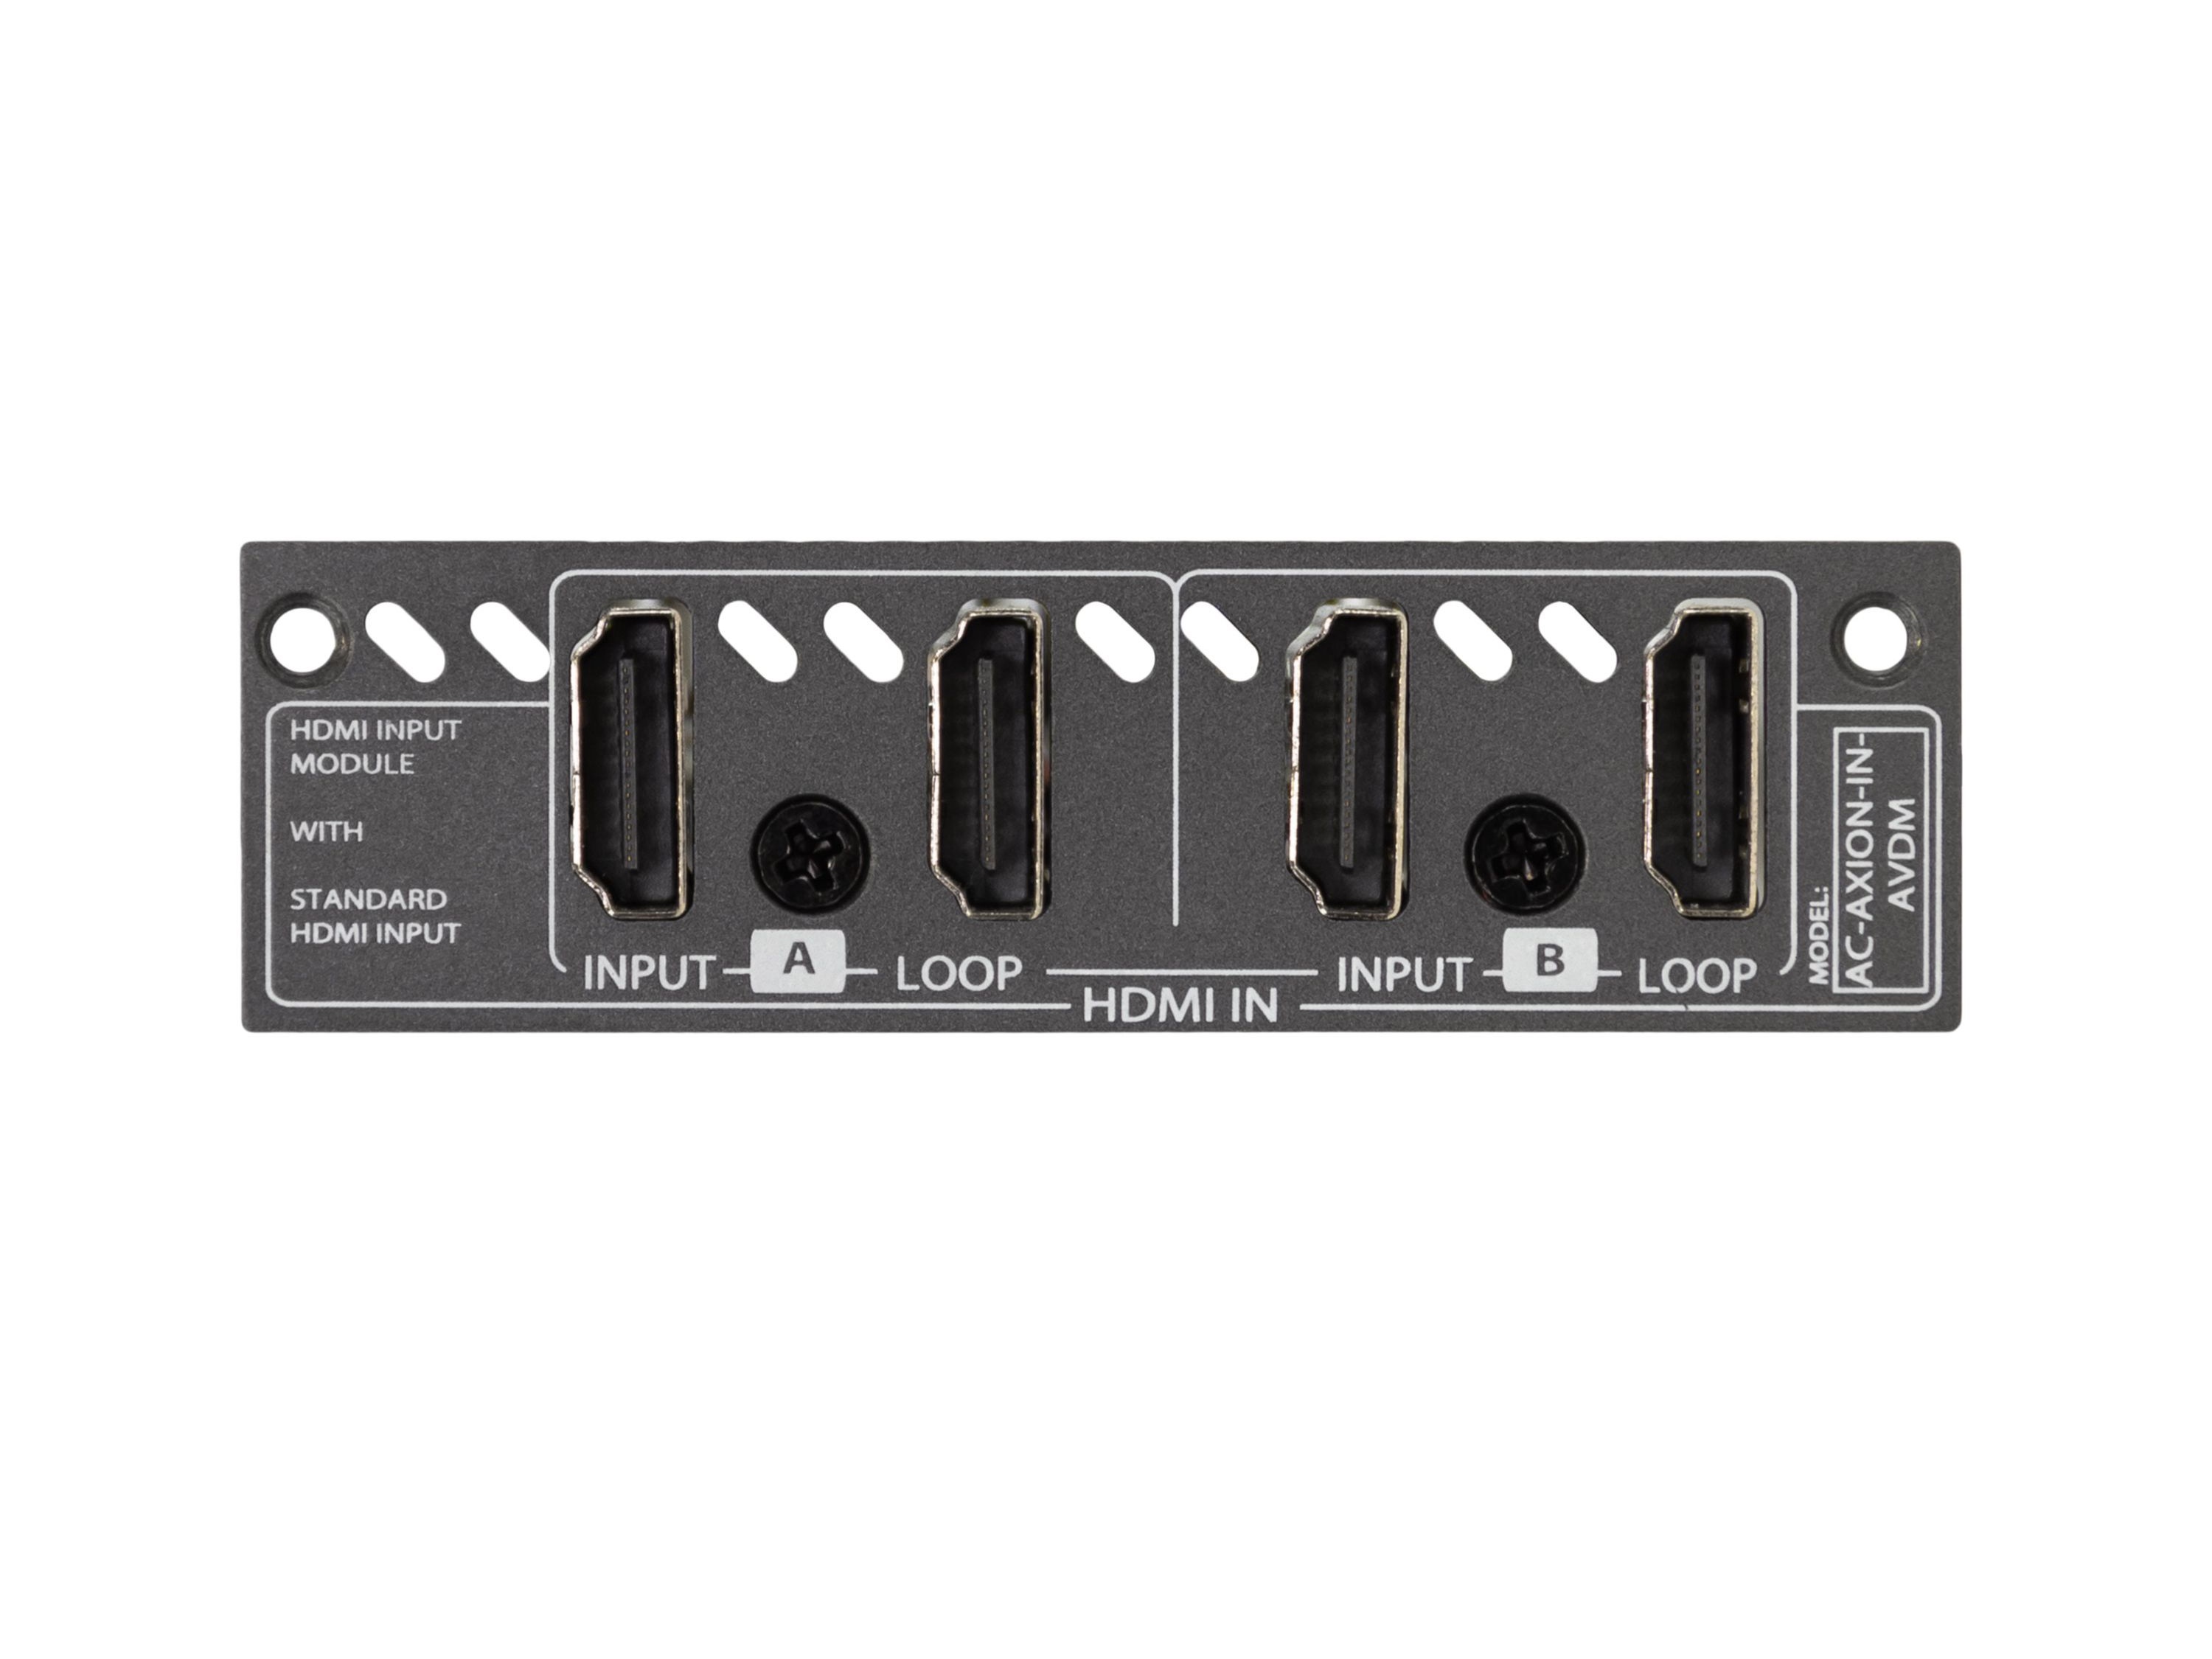 AC-AXION-IN-AVDM Dual 18Gbps HDMI Input Ports with Downmixing Card by AVPro Edge